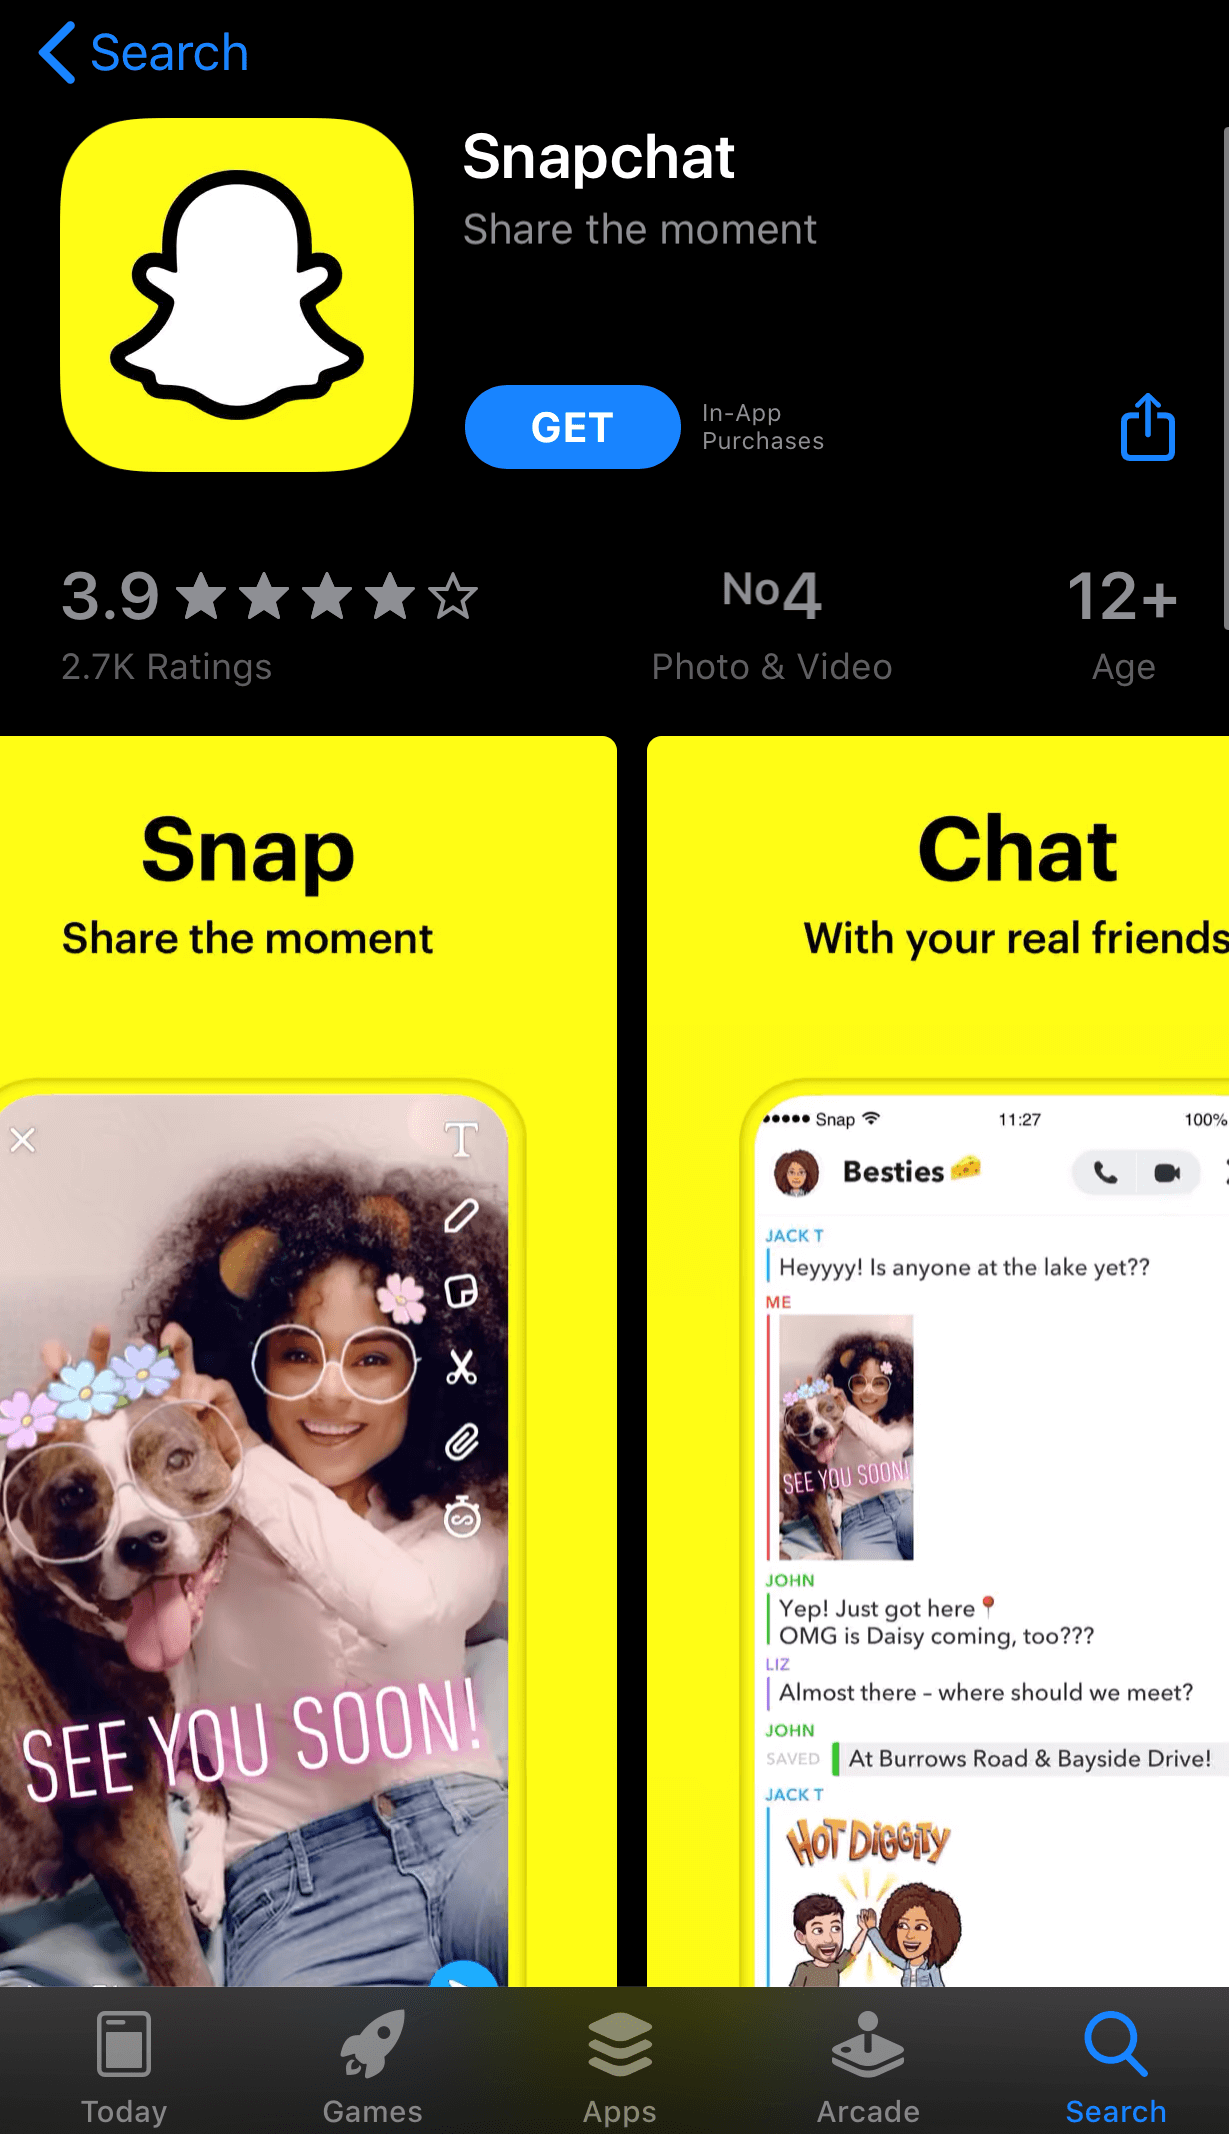 Share the moment with Snapchat app.